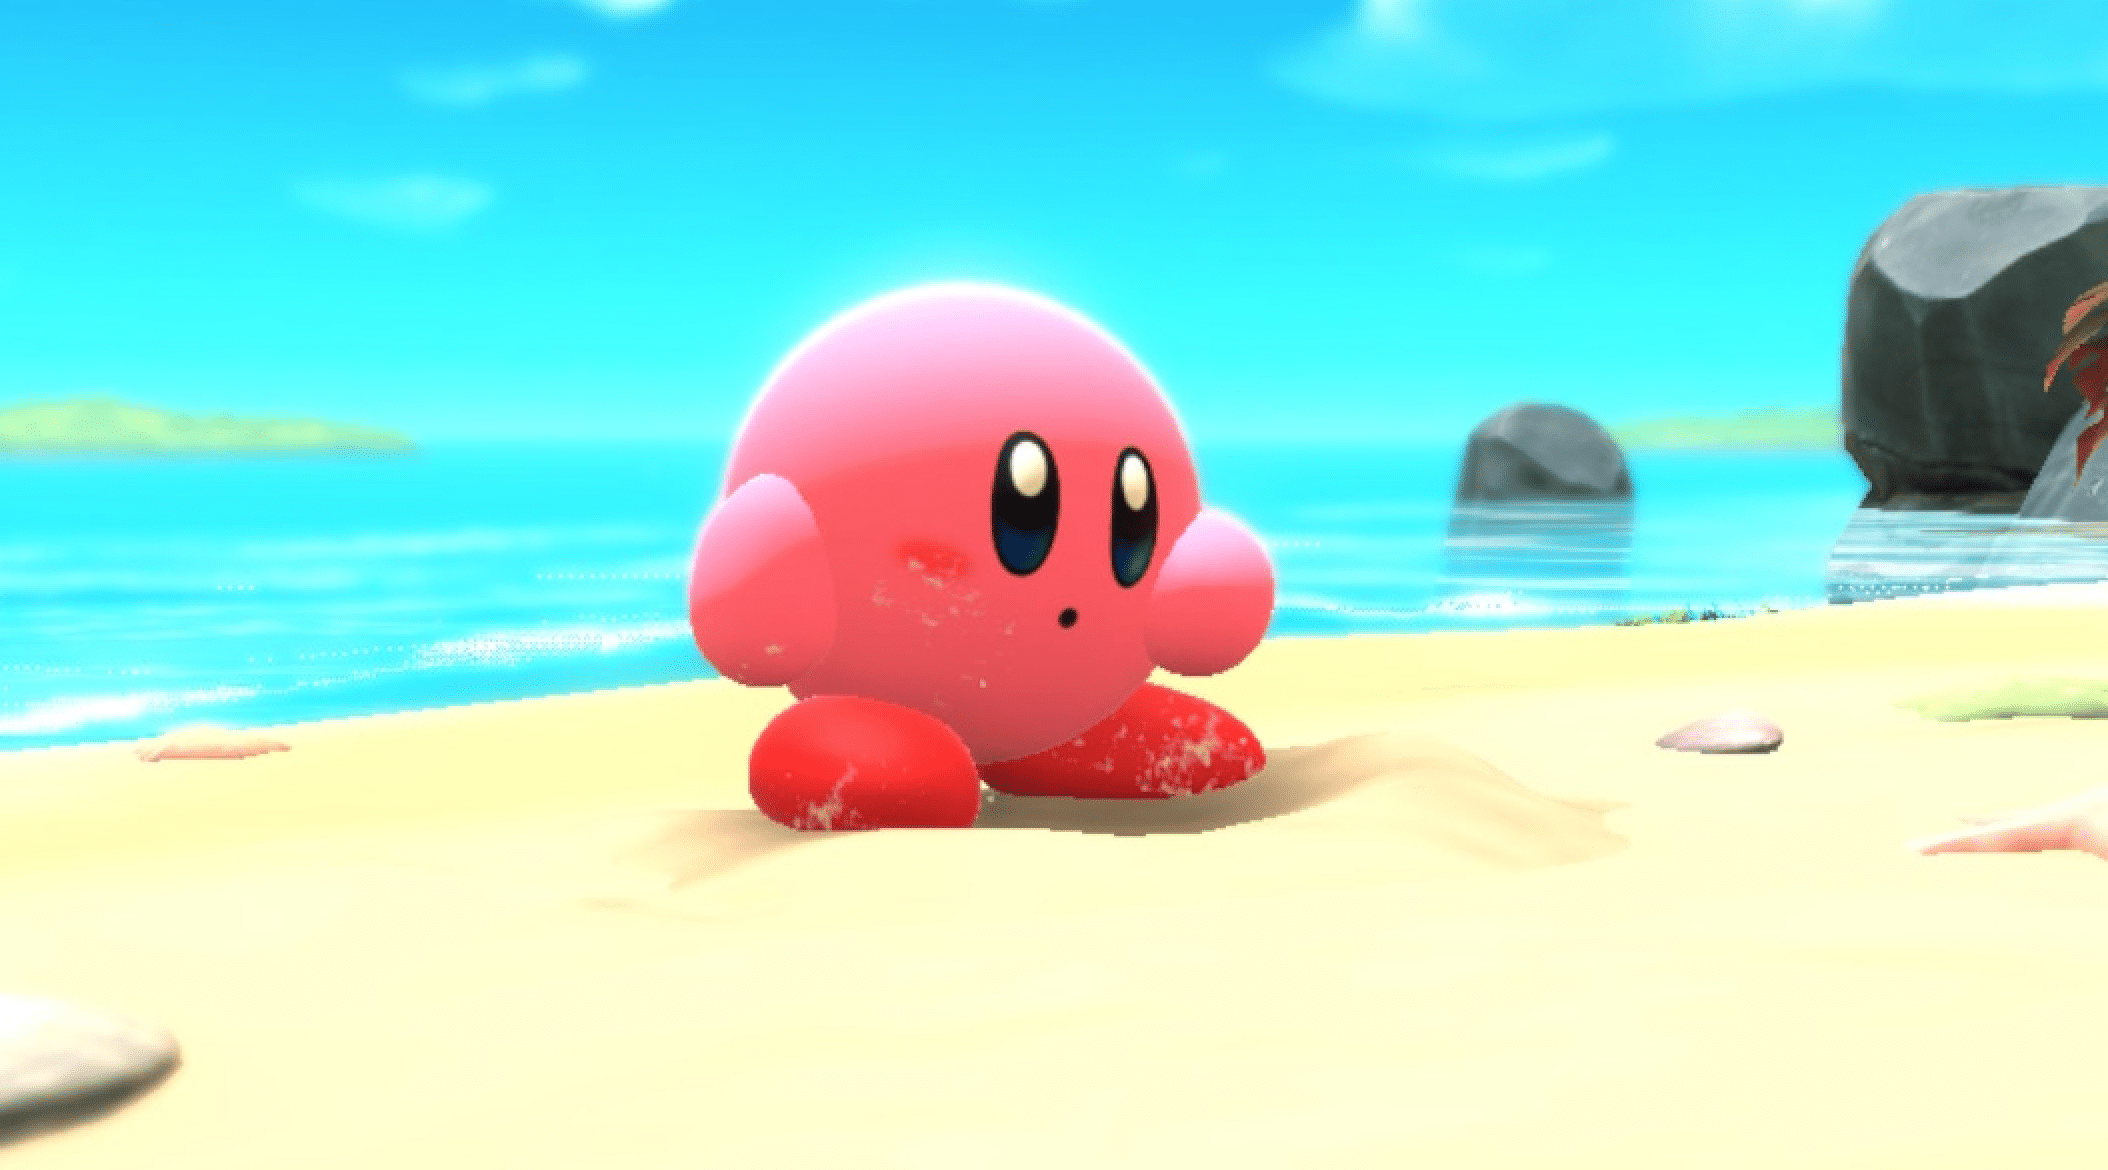 Kirby and the Forgotten Land goes down smooth like a Kirby game should